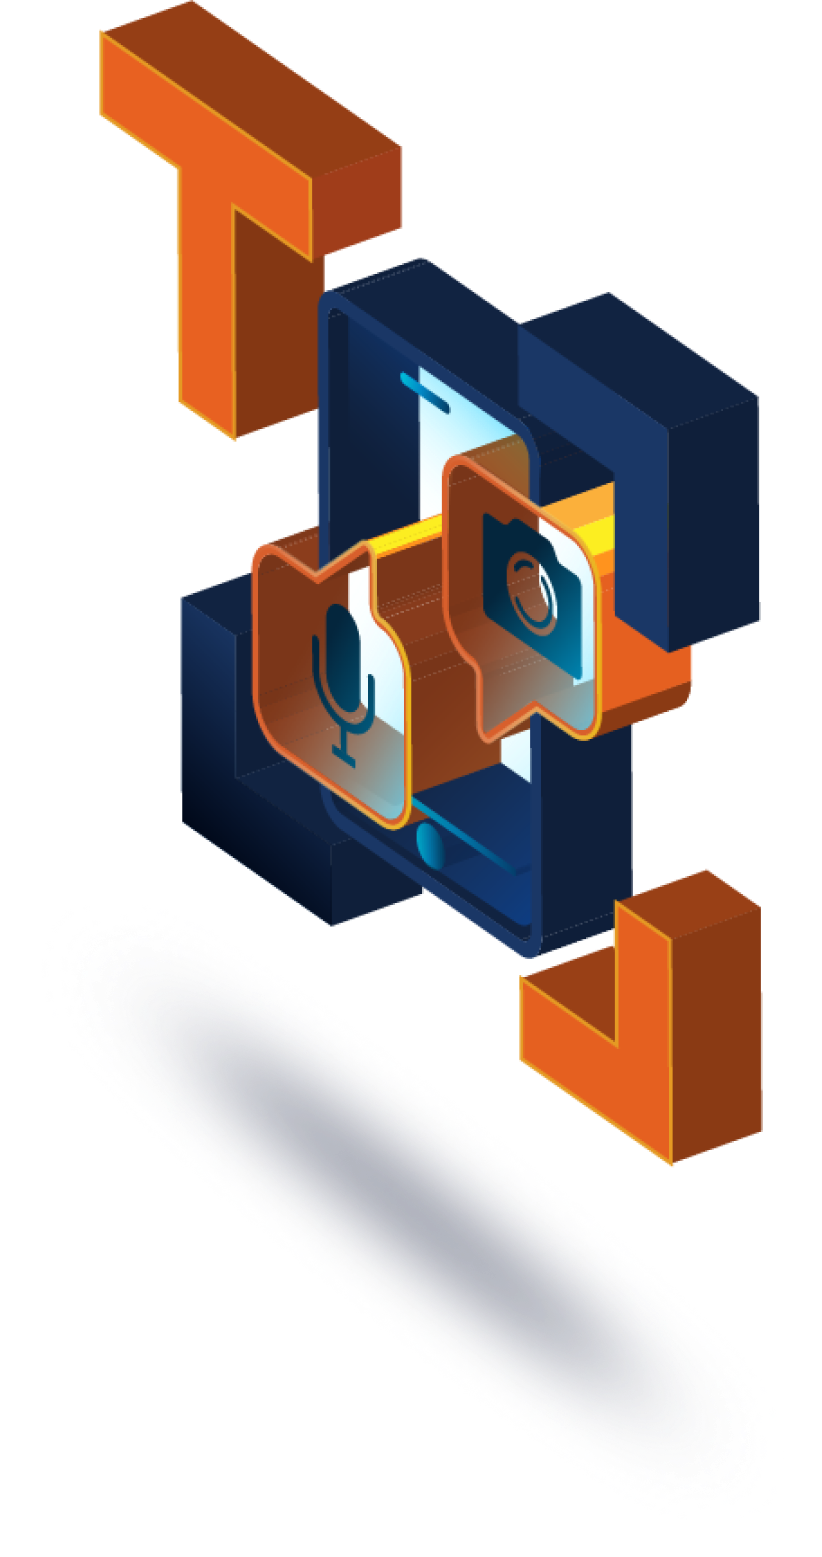 an image of a blue and orange object.